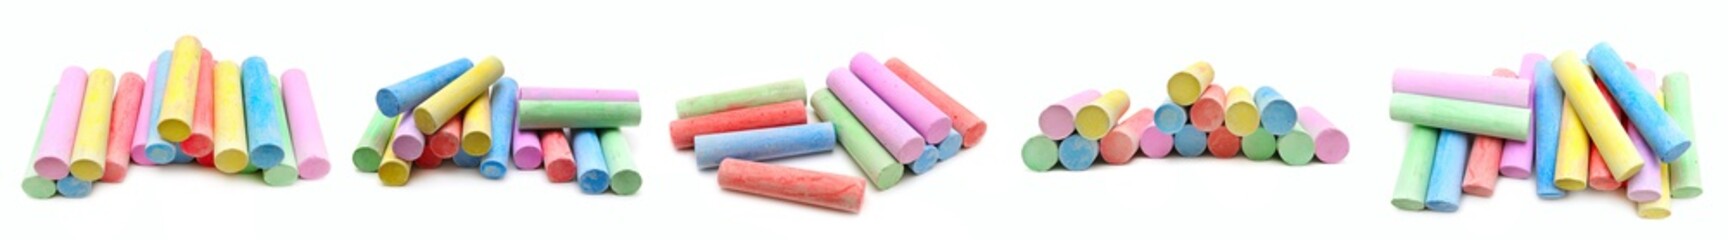 Multicolored chalk for children's creativity isolated on white